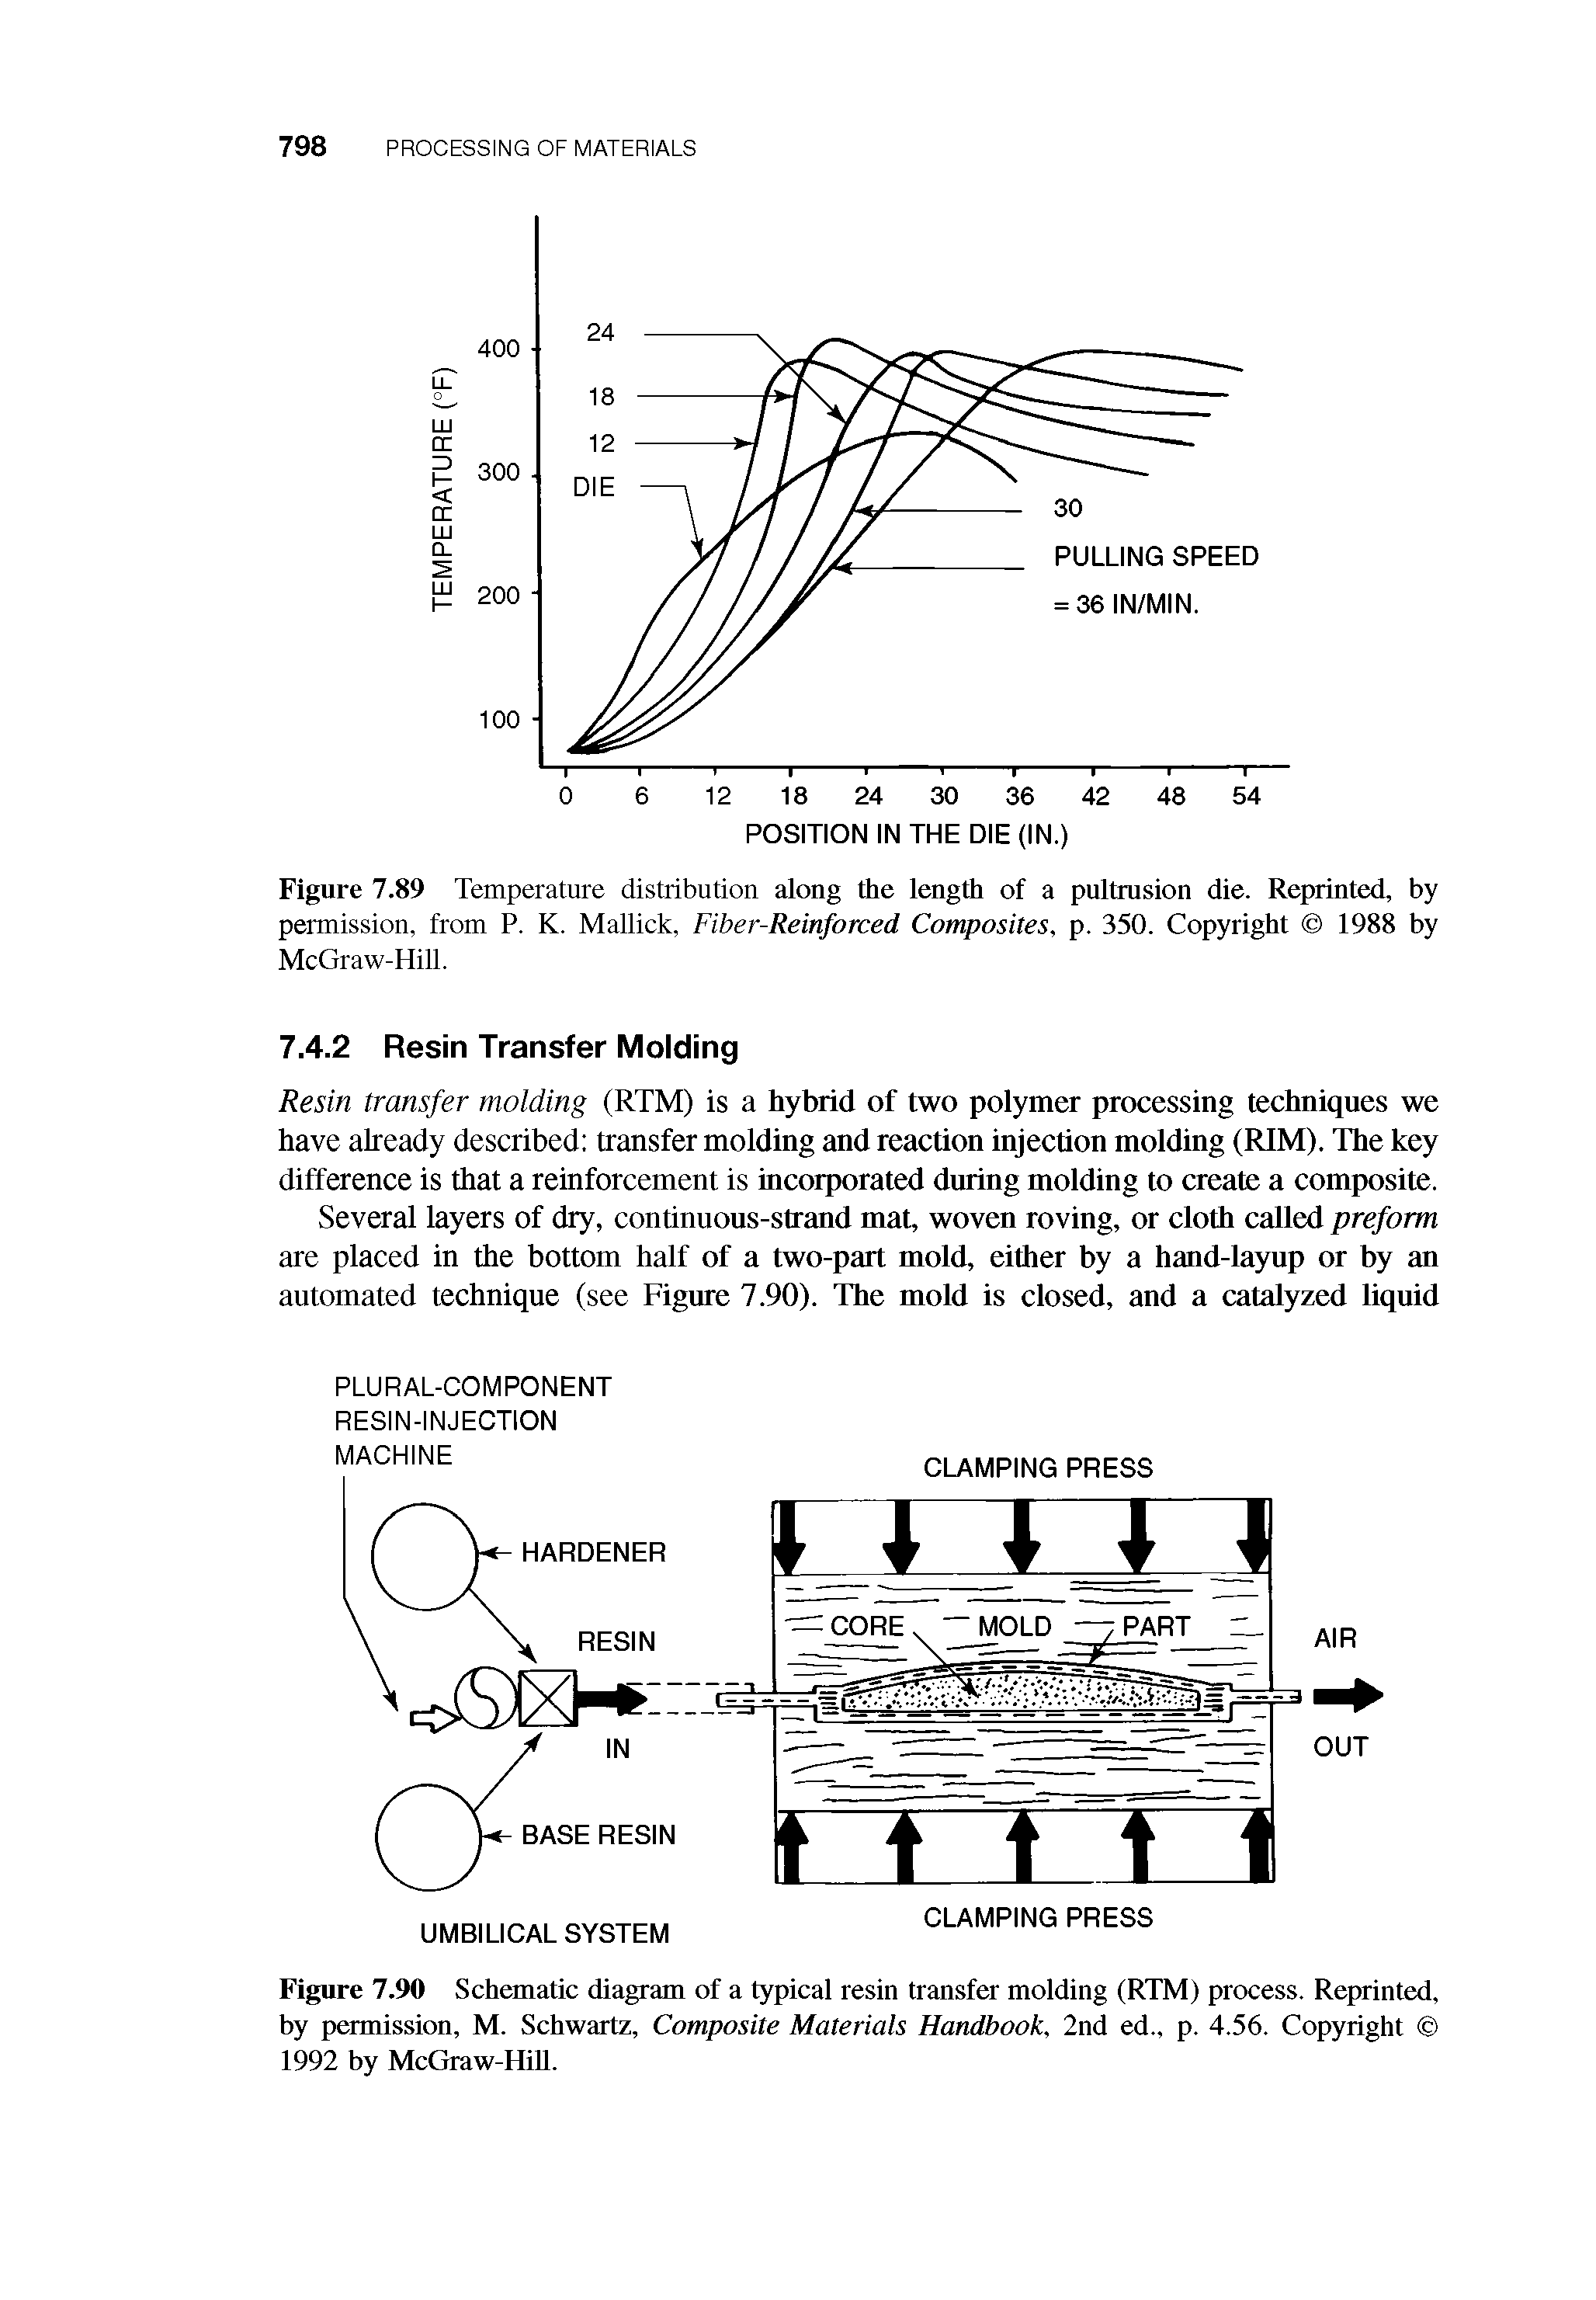 Figure 7.90 Schematic diagram of a typical resin transfer molding (RTM) process. Reprinted, by permission, M. Schwartz, Composite Materials Handbook, 2nd ed., p. 4.56. Copyright 1992 by McGraw-HiU.